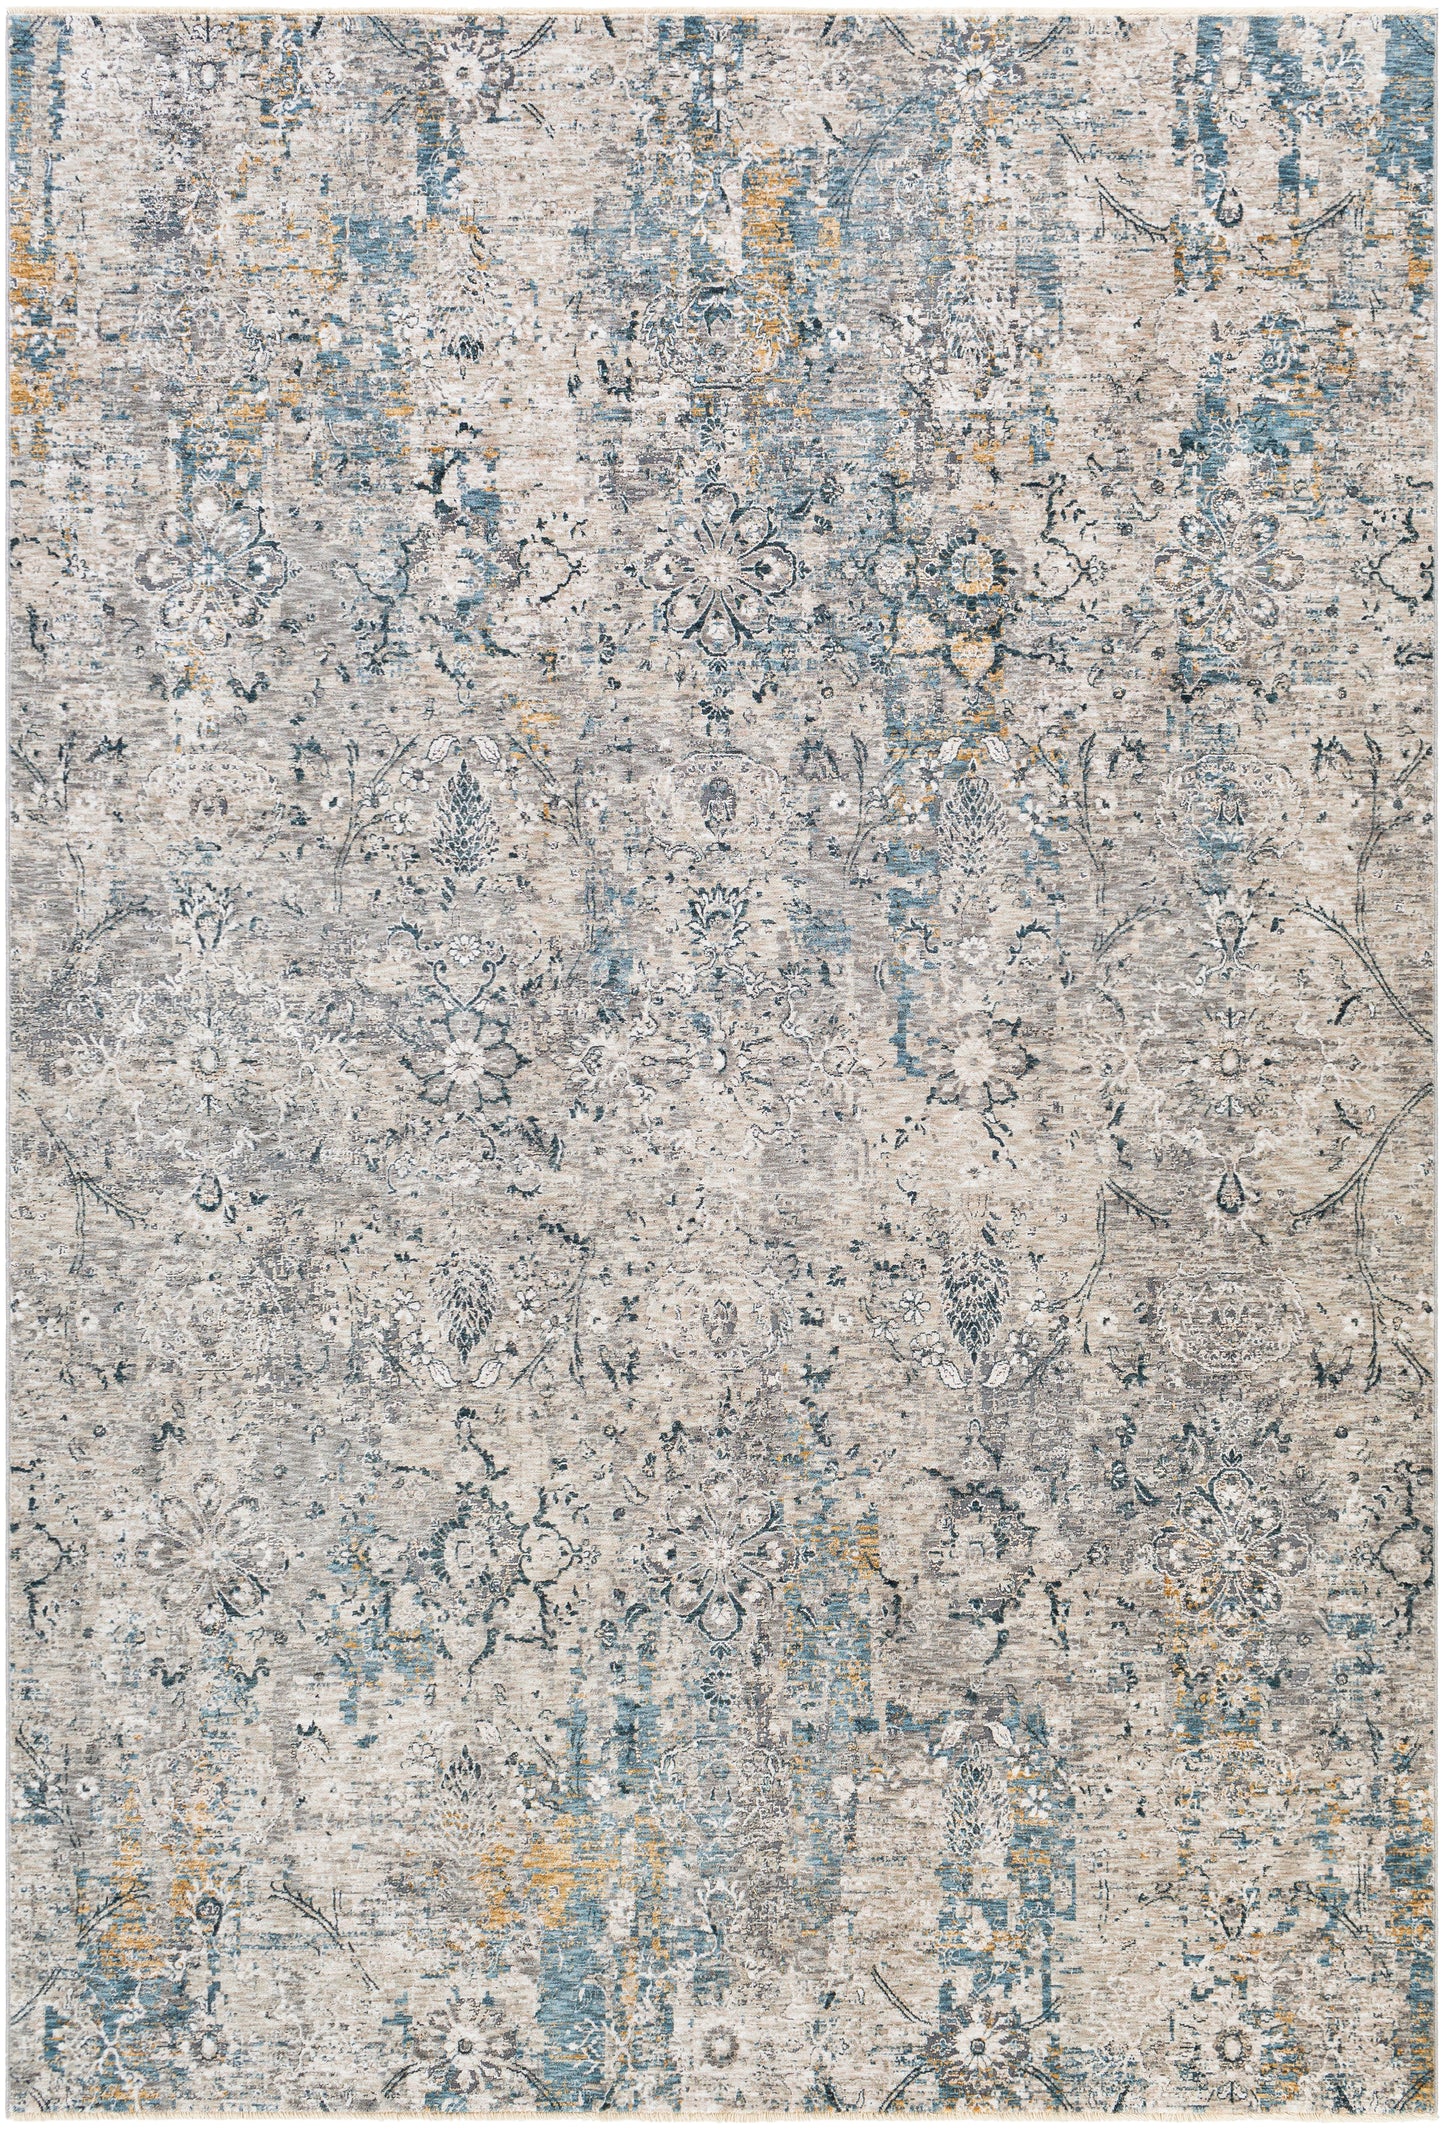 Cardiff 26279 Machine Woven Synthetic Blend Indoor Area Rug by Surya Rugs